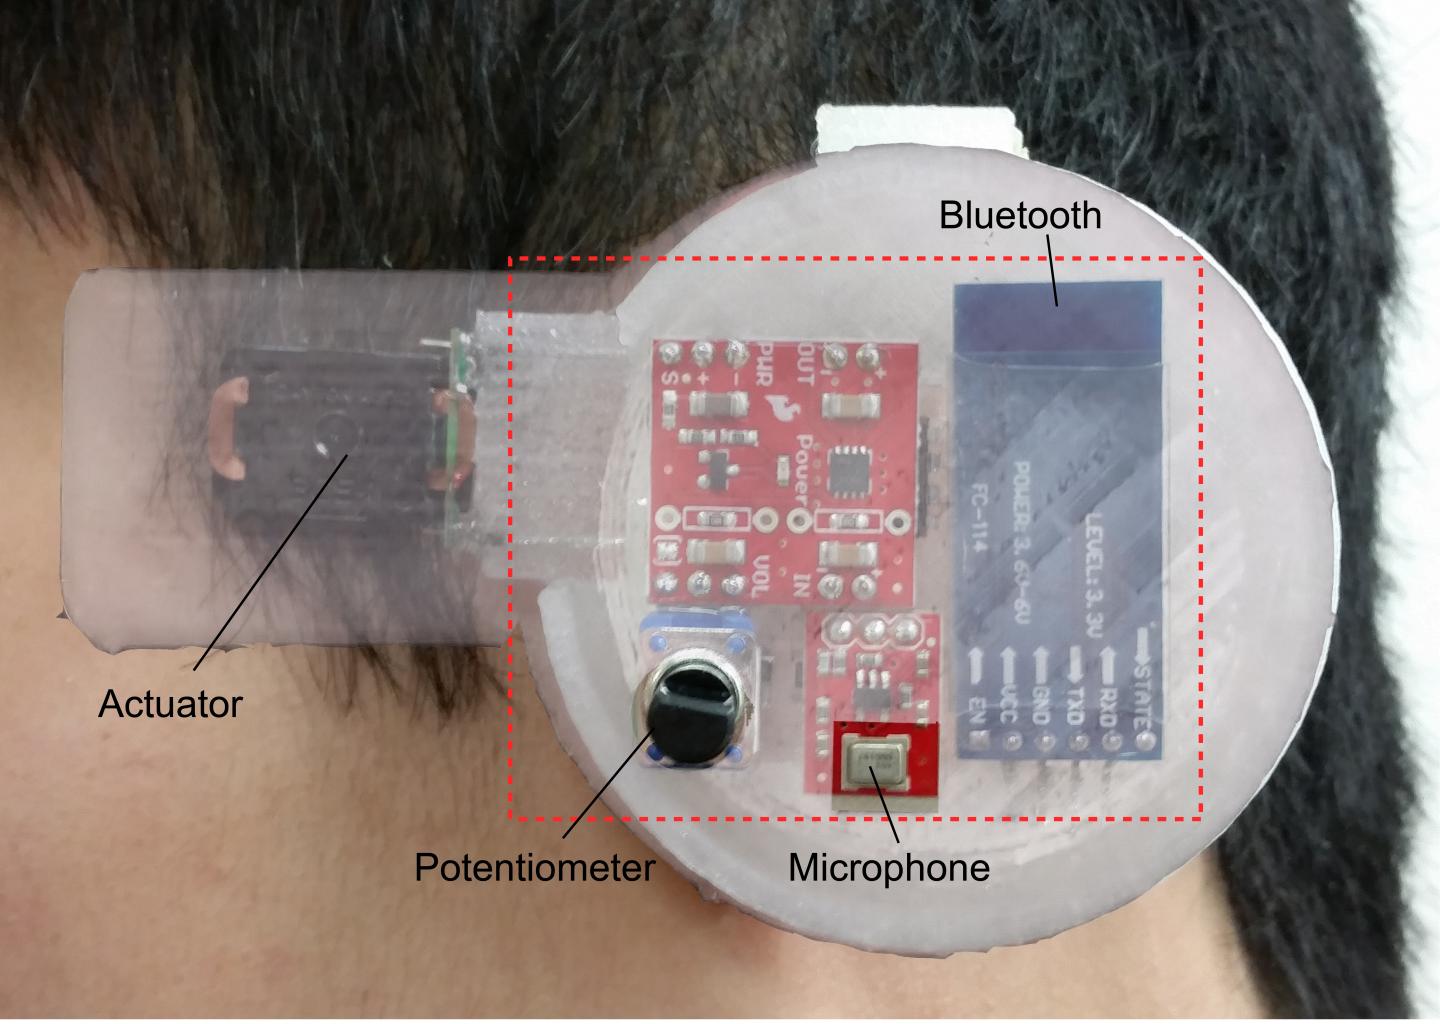 Personalized 'Earable' Sensor Monitors Body Temperature in Real Time